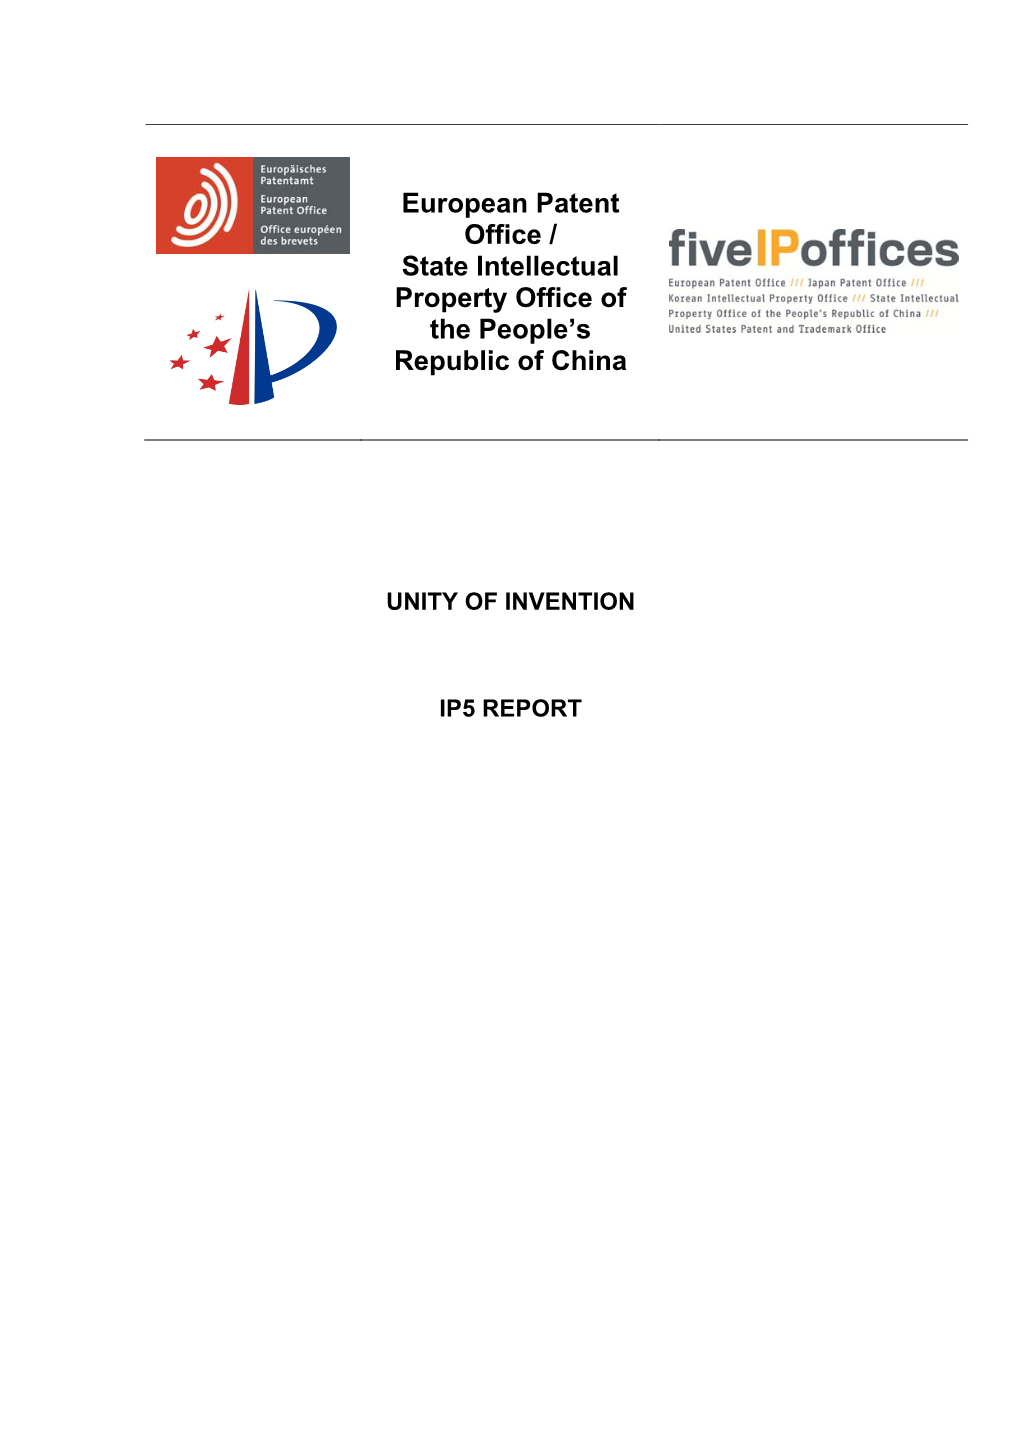 Download IP5 Report on Unity of Invention